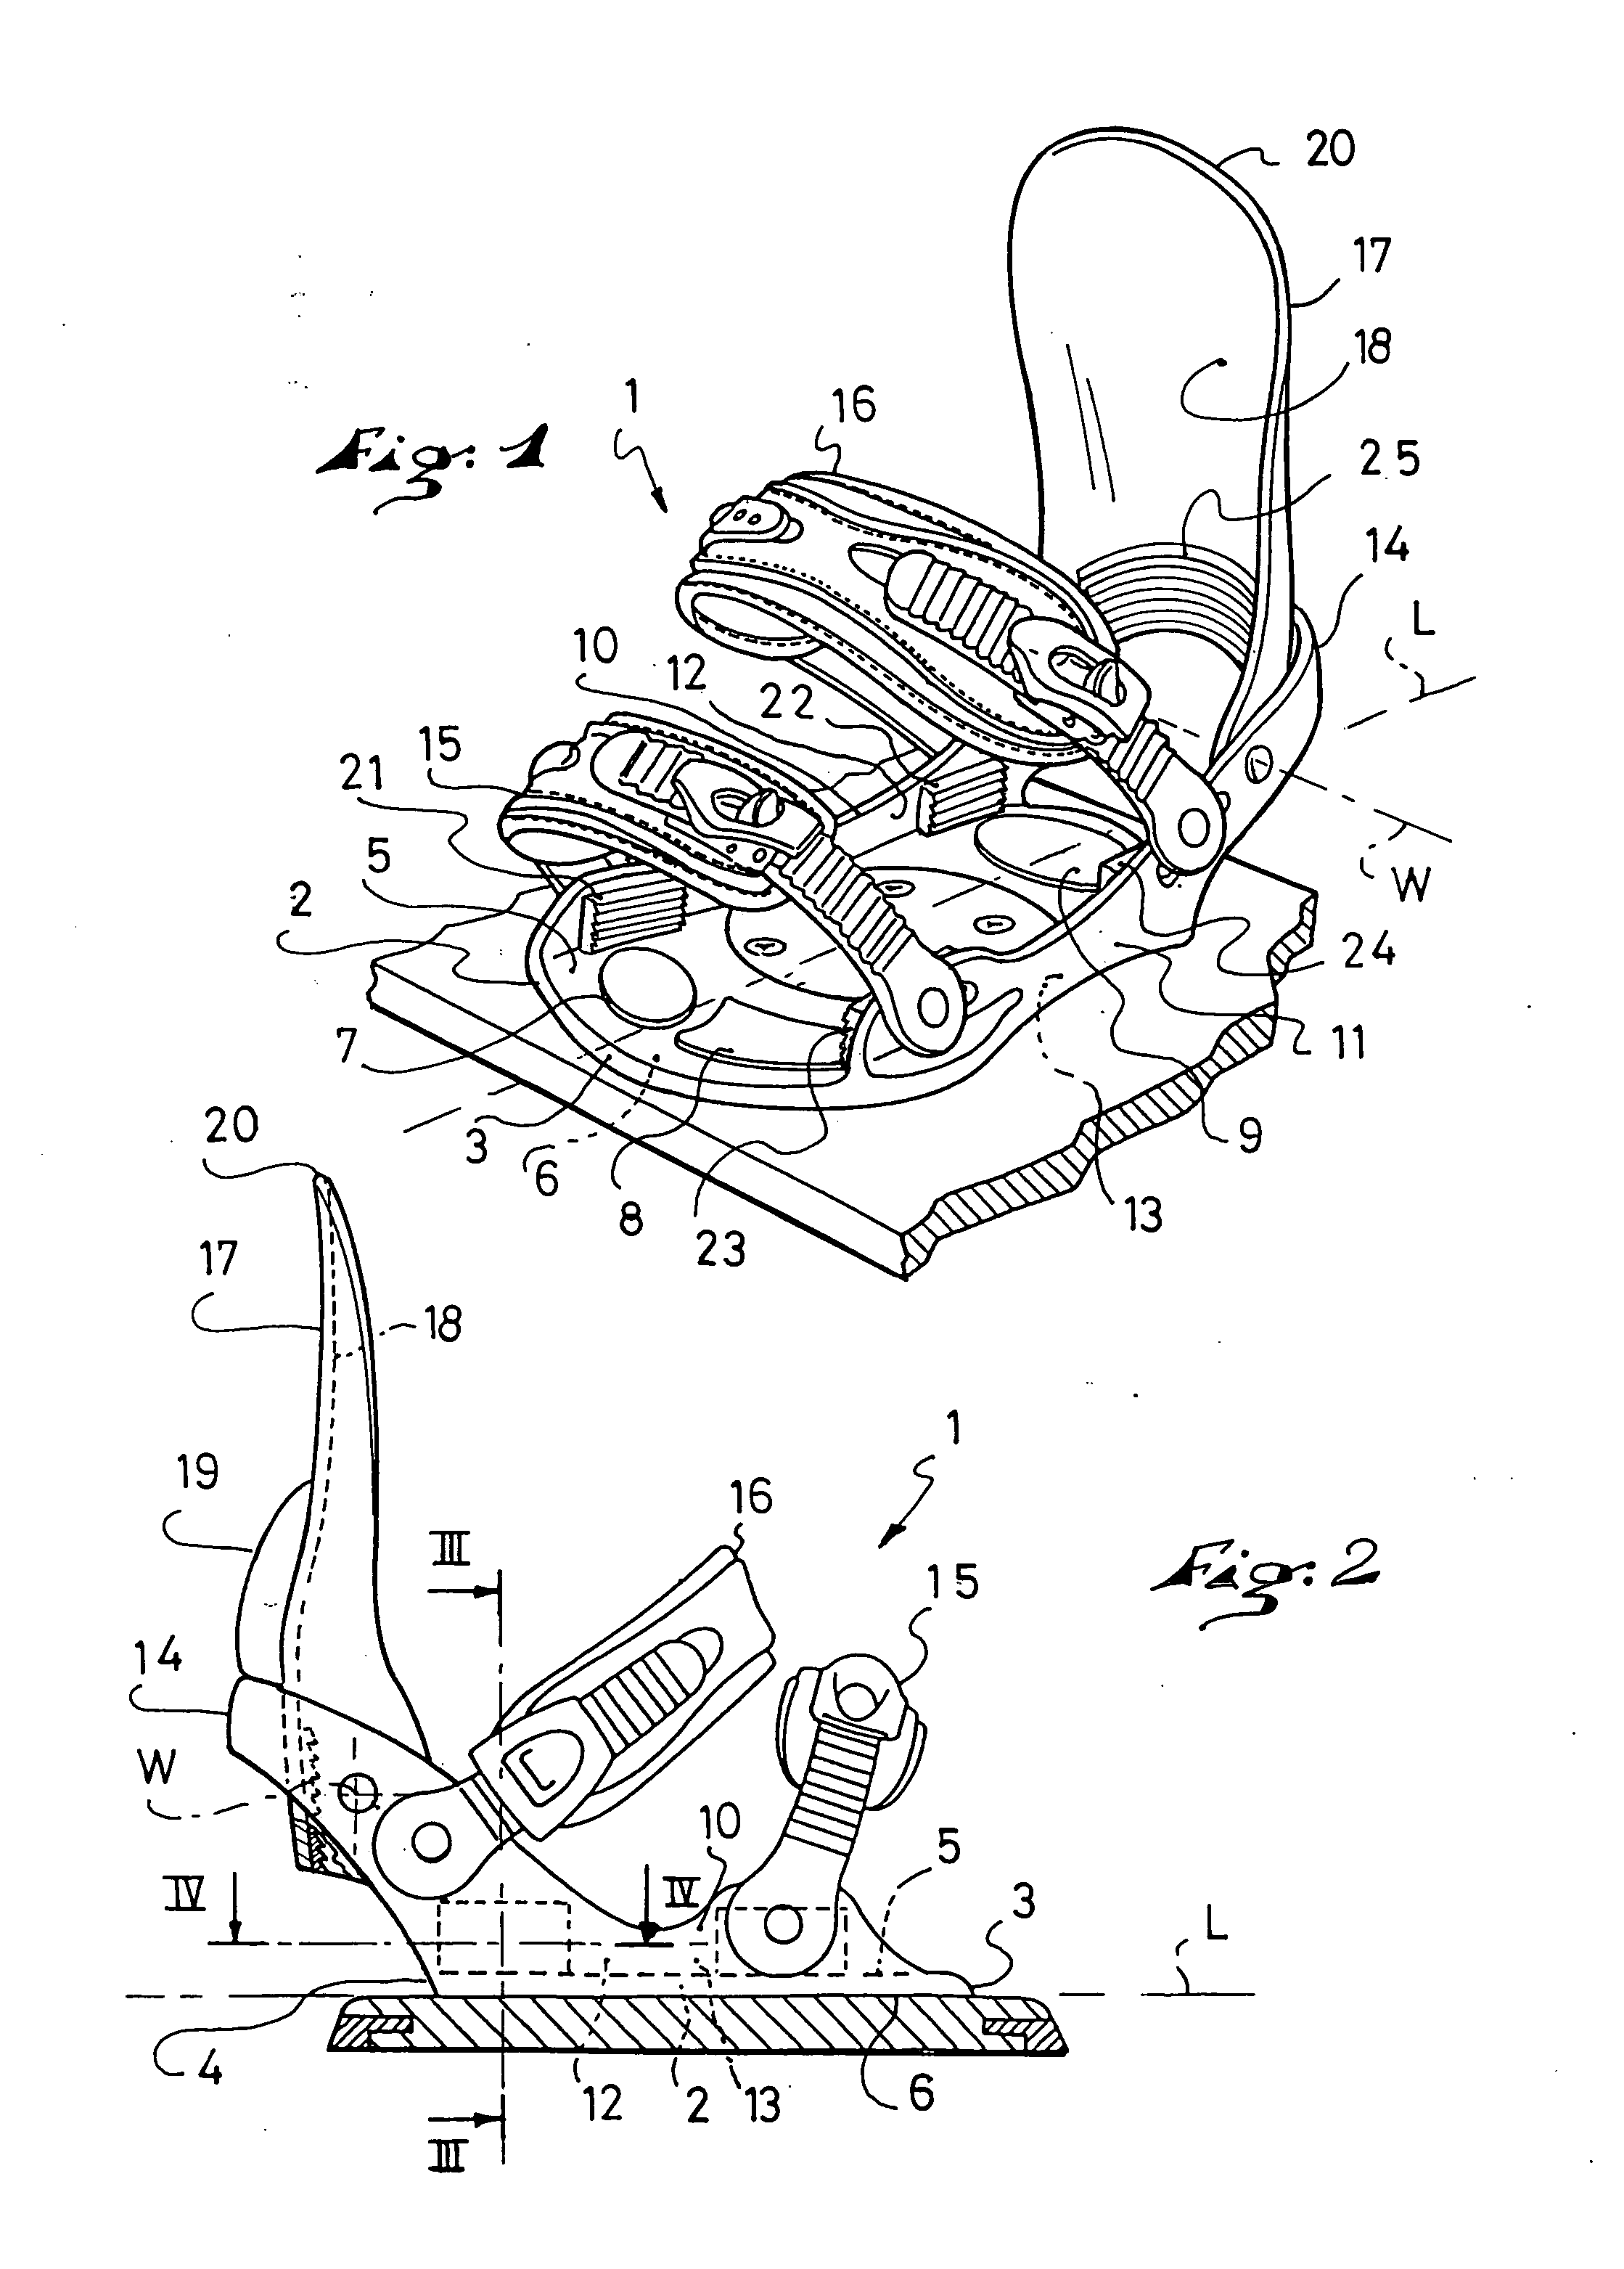 Device for retaining a boot on a gliding, rolling, or walking board adapted to a sporting activity, and the boot therefor